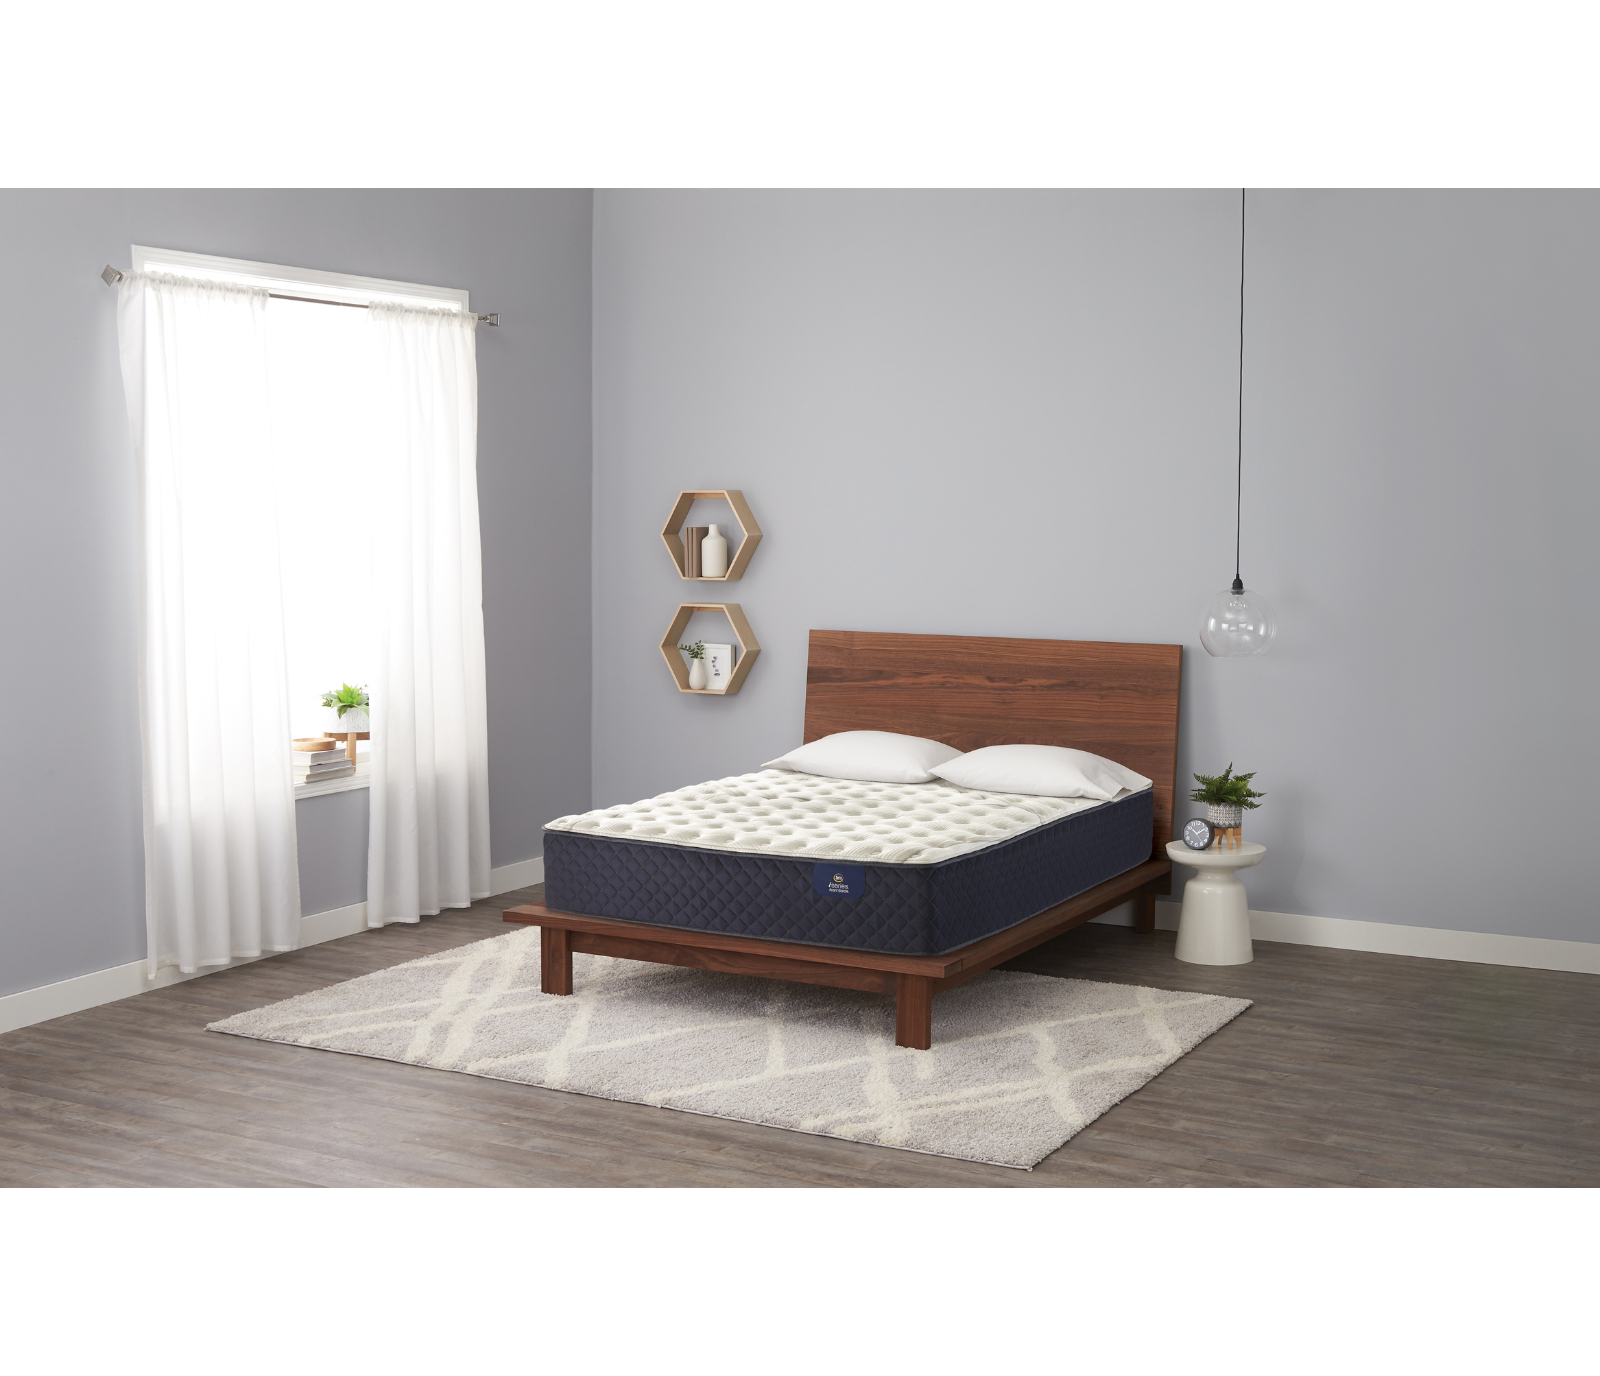 iSeries Exhale IV King Mattress - Tight Top Firm